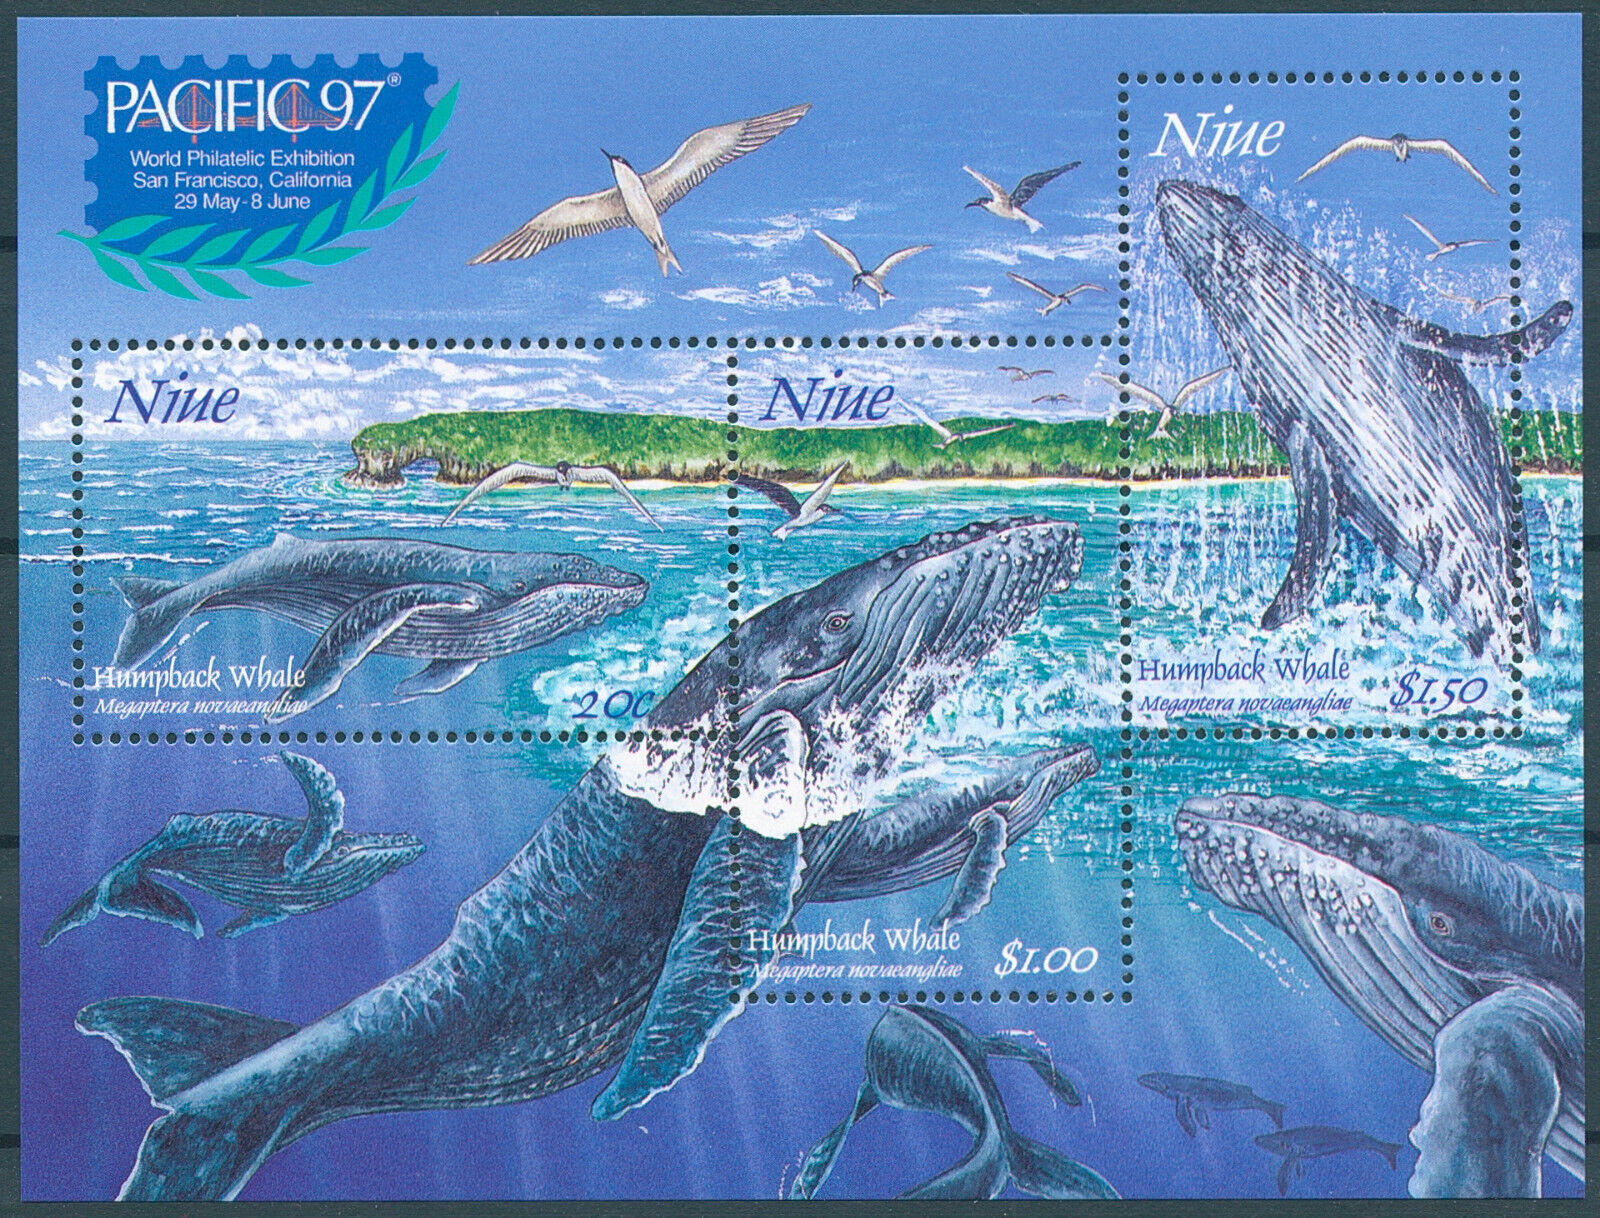 Niue 1997 MNH Whales Stamps Humpback Whale Pacific 97 World Philatelic 3v M/S